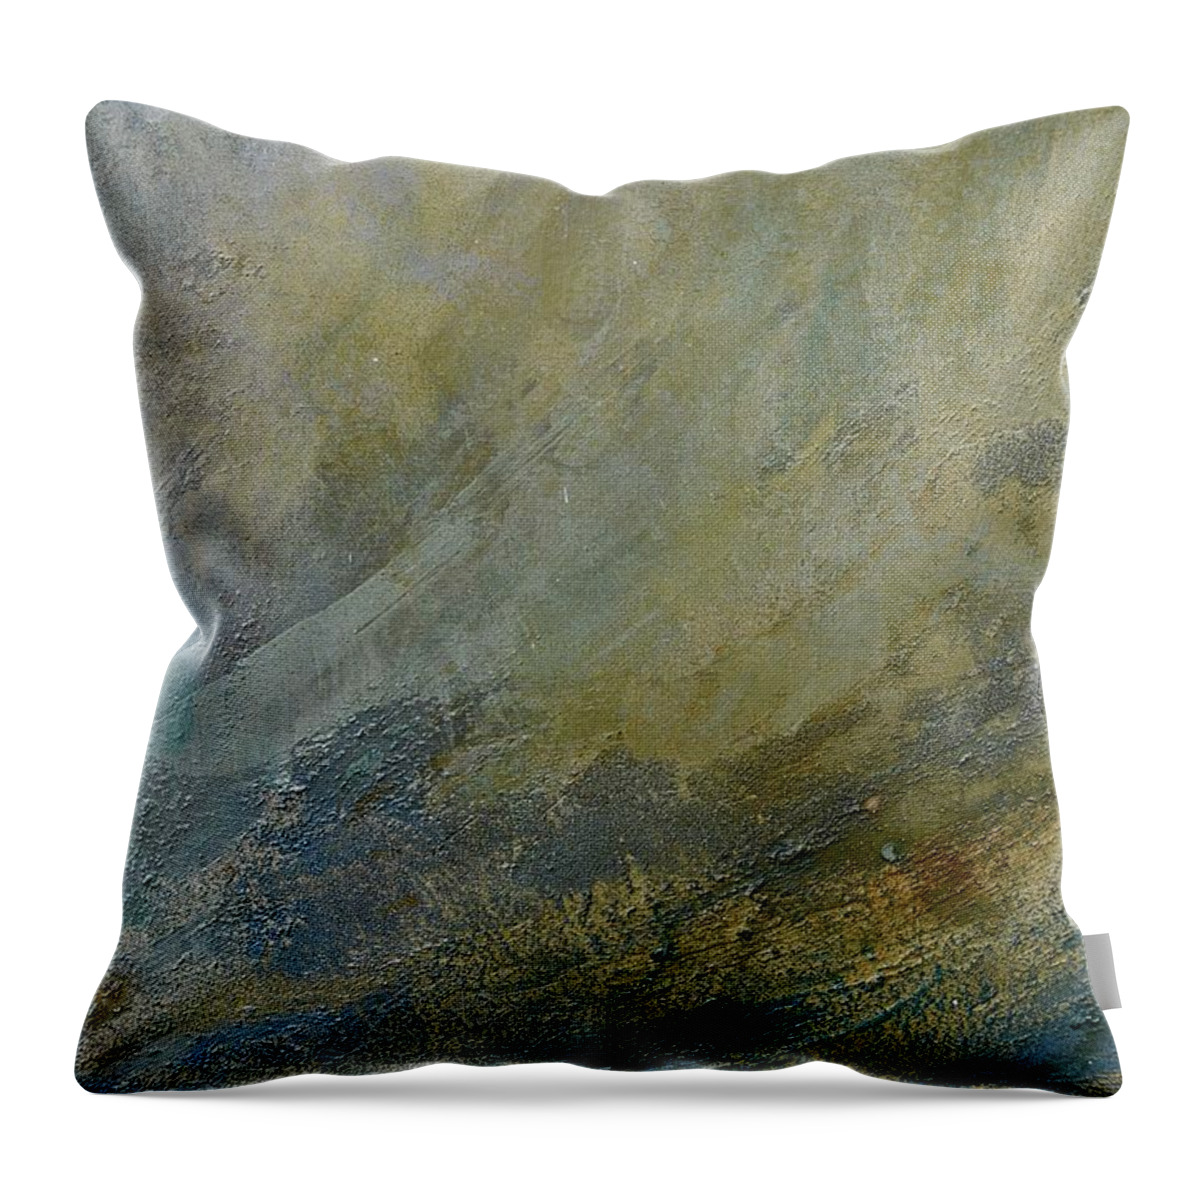 Creation Throw Pillow featuring the painting Let the Dry earth Appear by Laurie Snow Hein